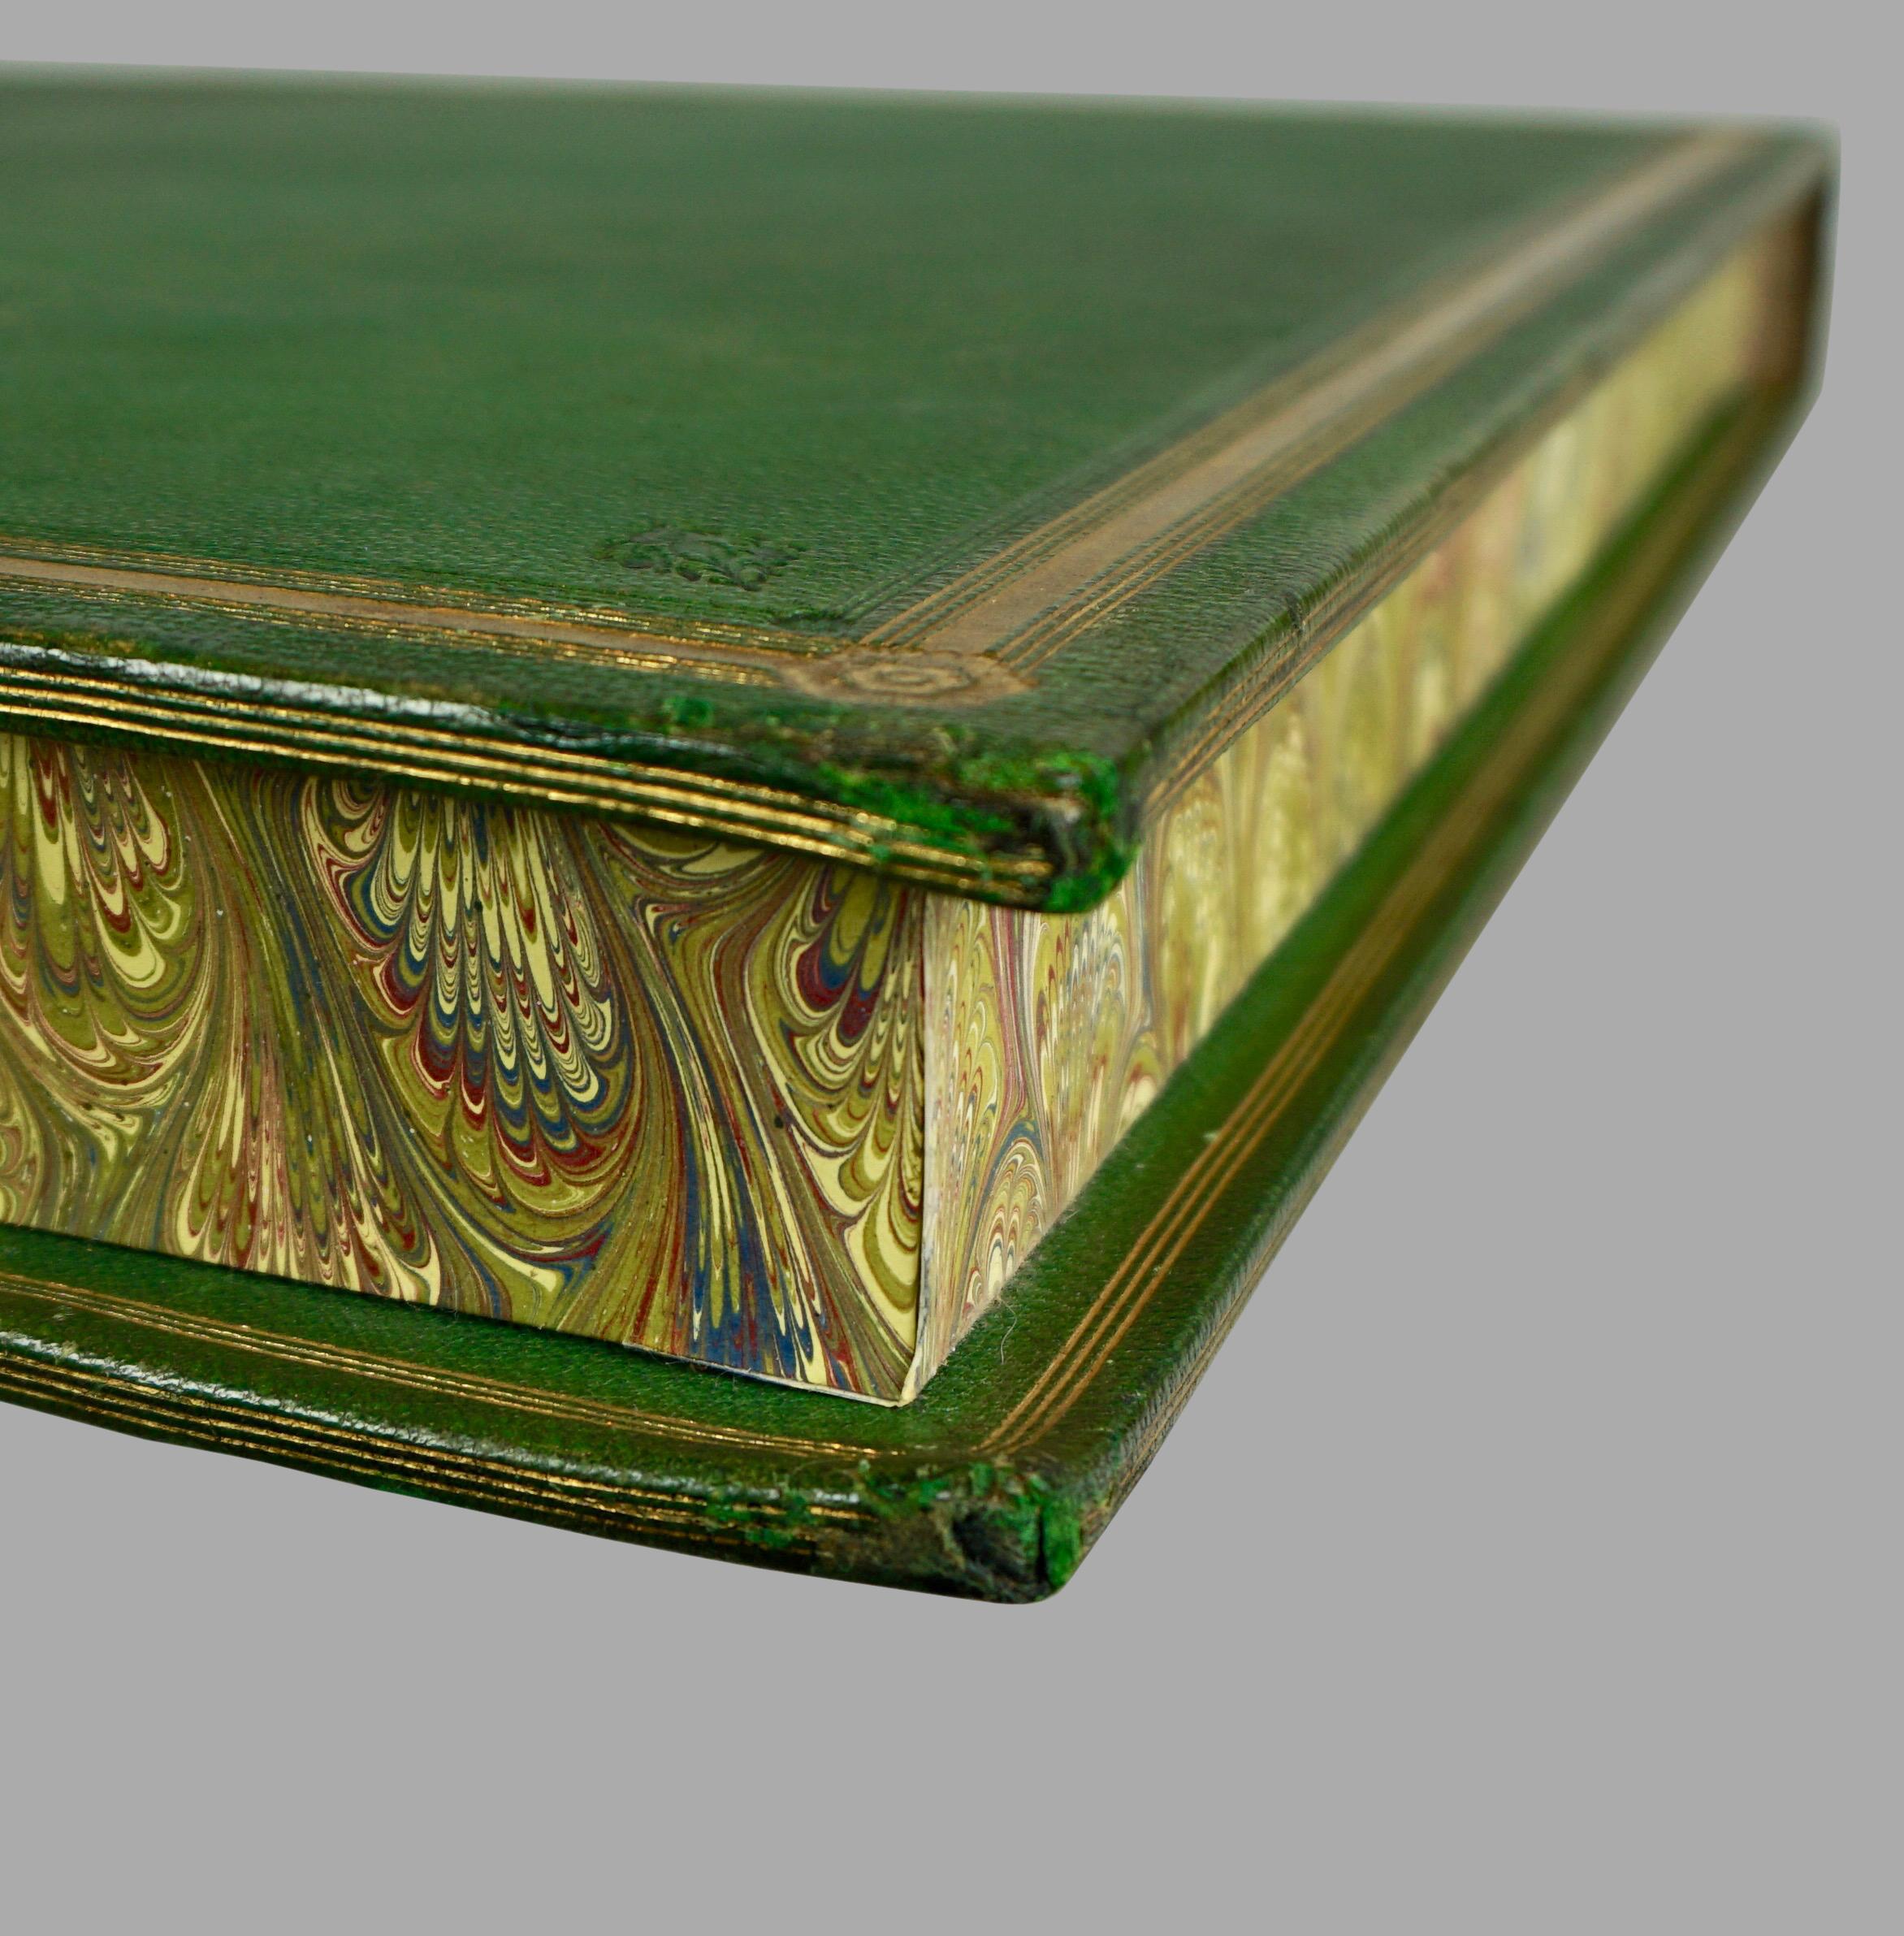 Green Morocco Leather Elephant Folio Book Cover Now A Marbleized Paper Lined Box 8